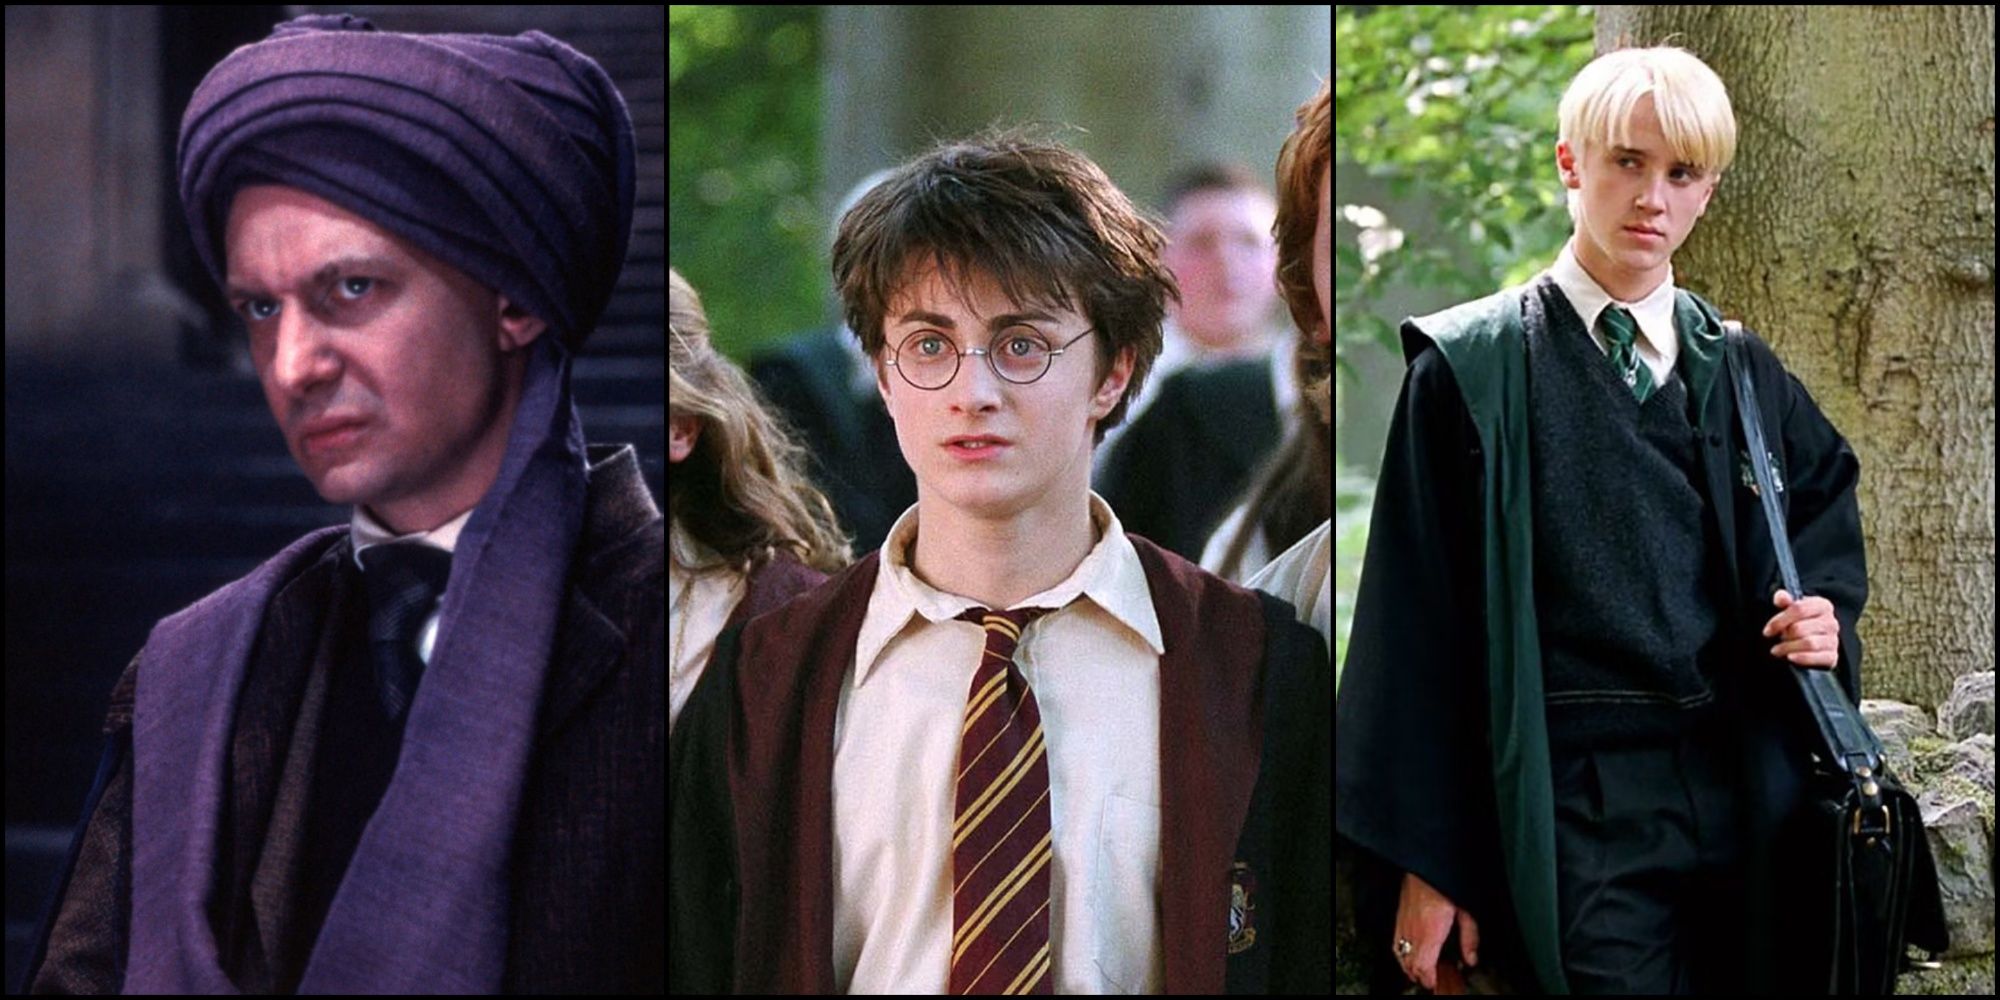 Professor Quirrell, Harry, and Draco Malfoy in Harry Potter